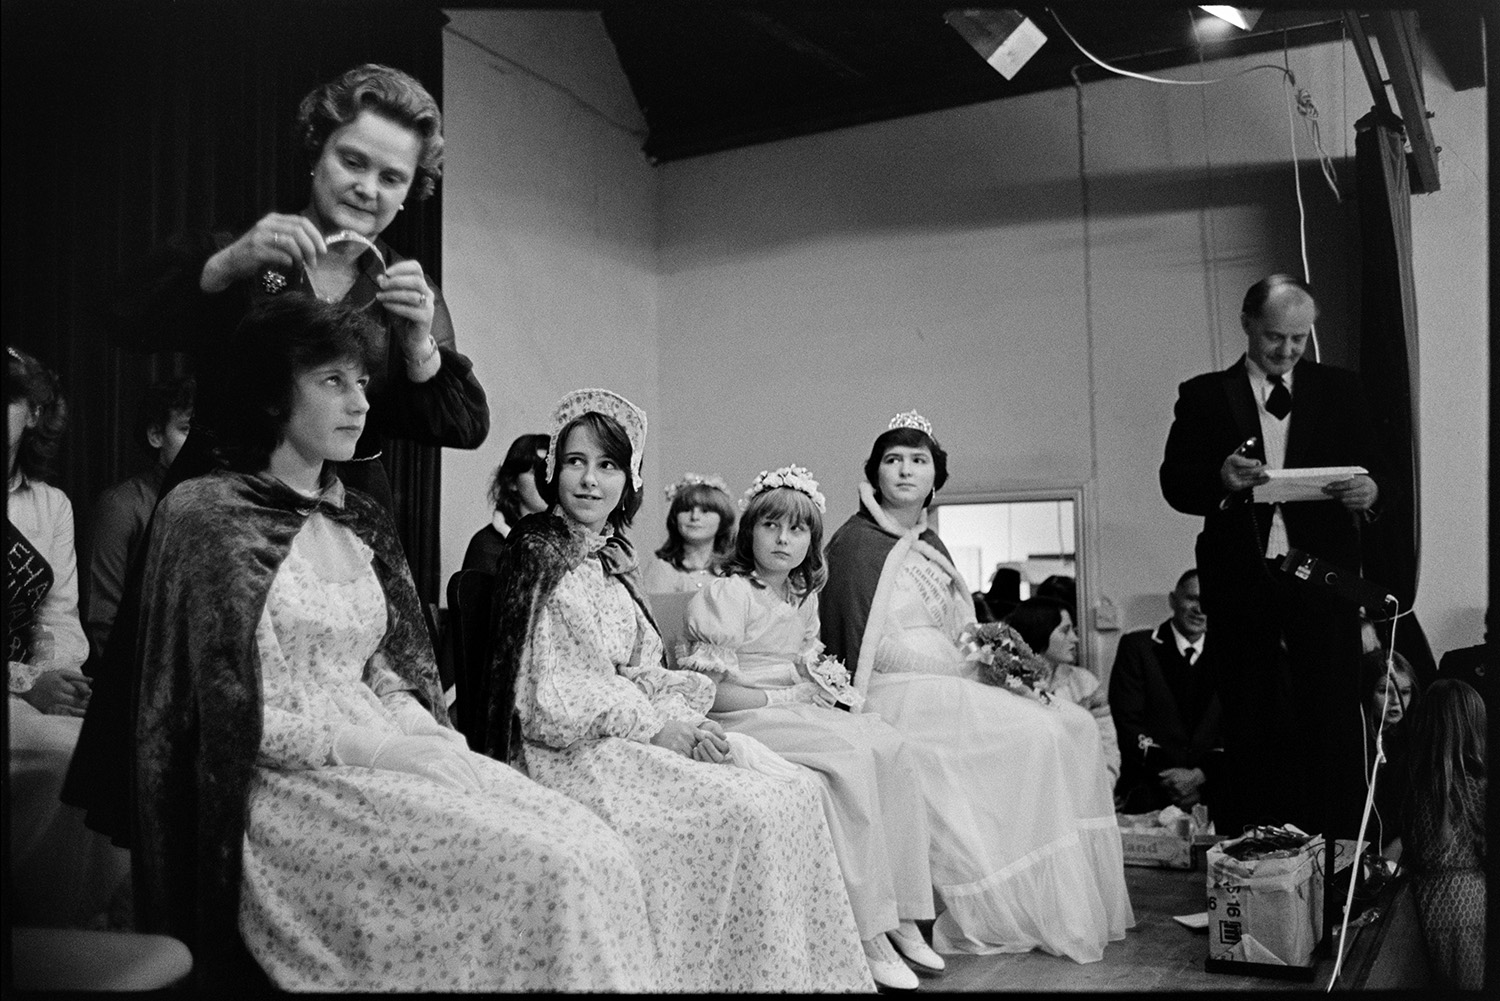 Carnival queen being crowned, fancy dress parade. 
[A woman crowing the Northlew Carnival Queen and Princesses in the village hall.]